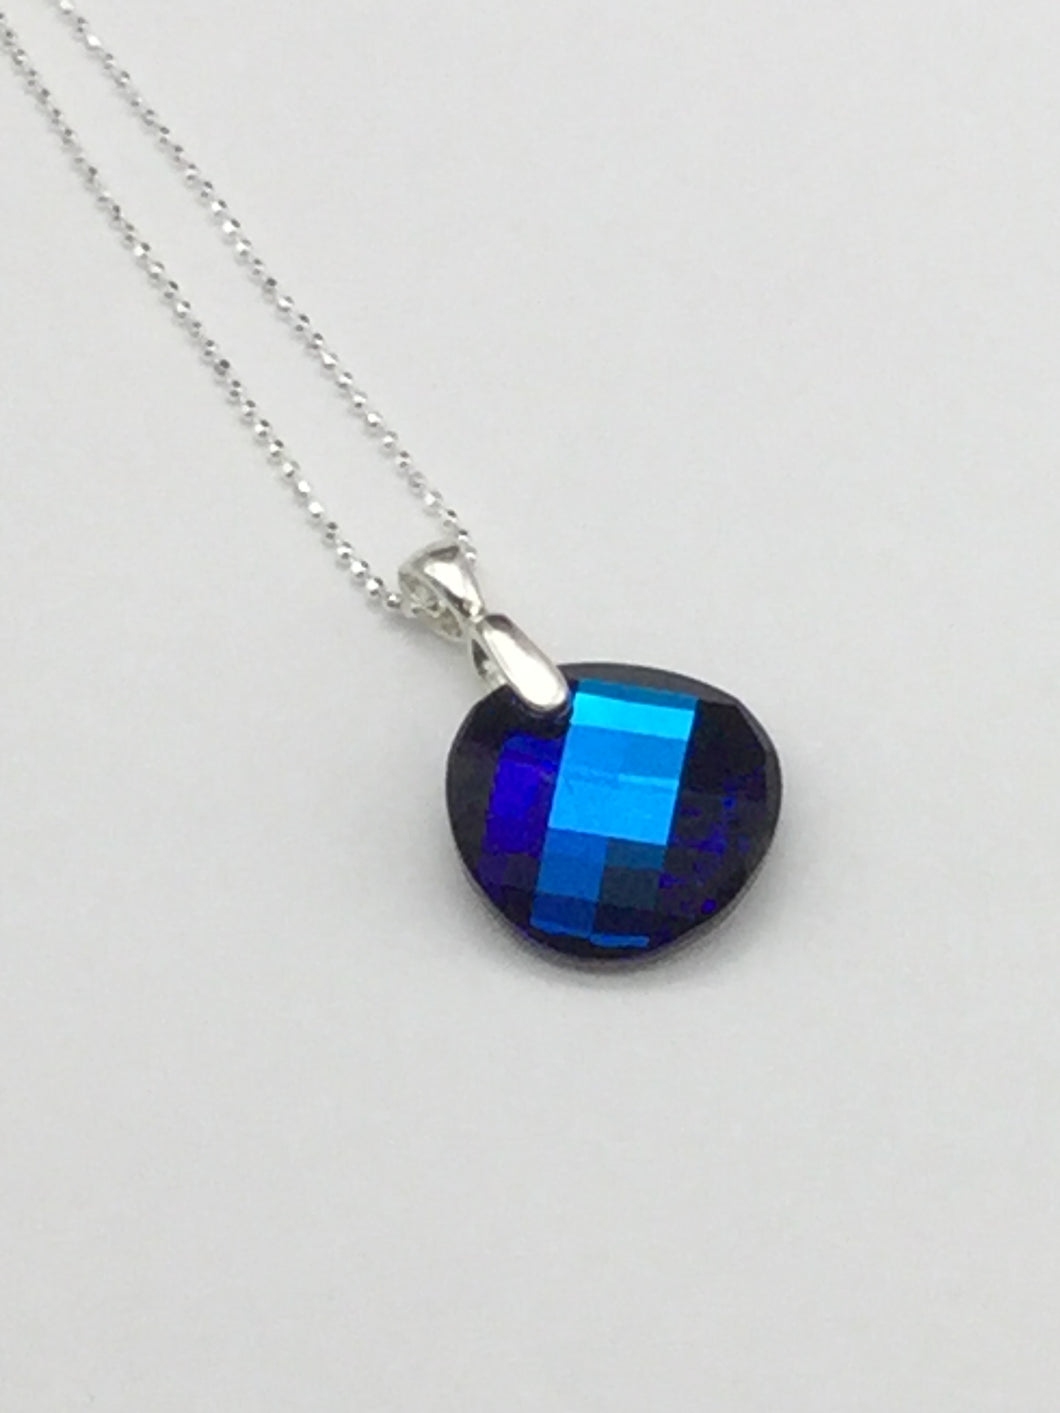 Swarovski Crystal Blue Checkerboard and Sterling Silver Necklace